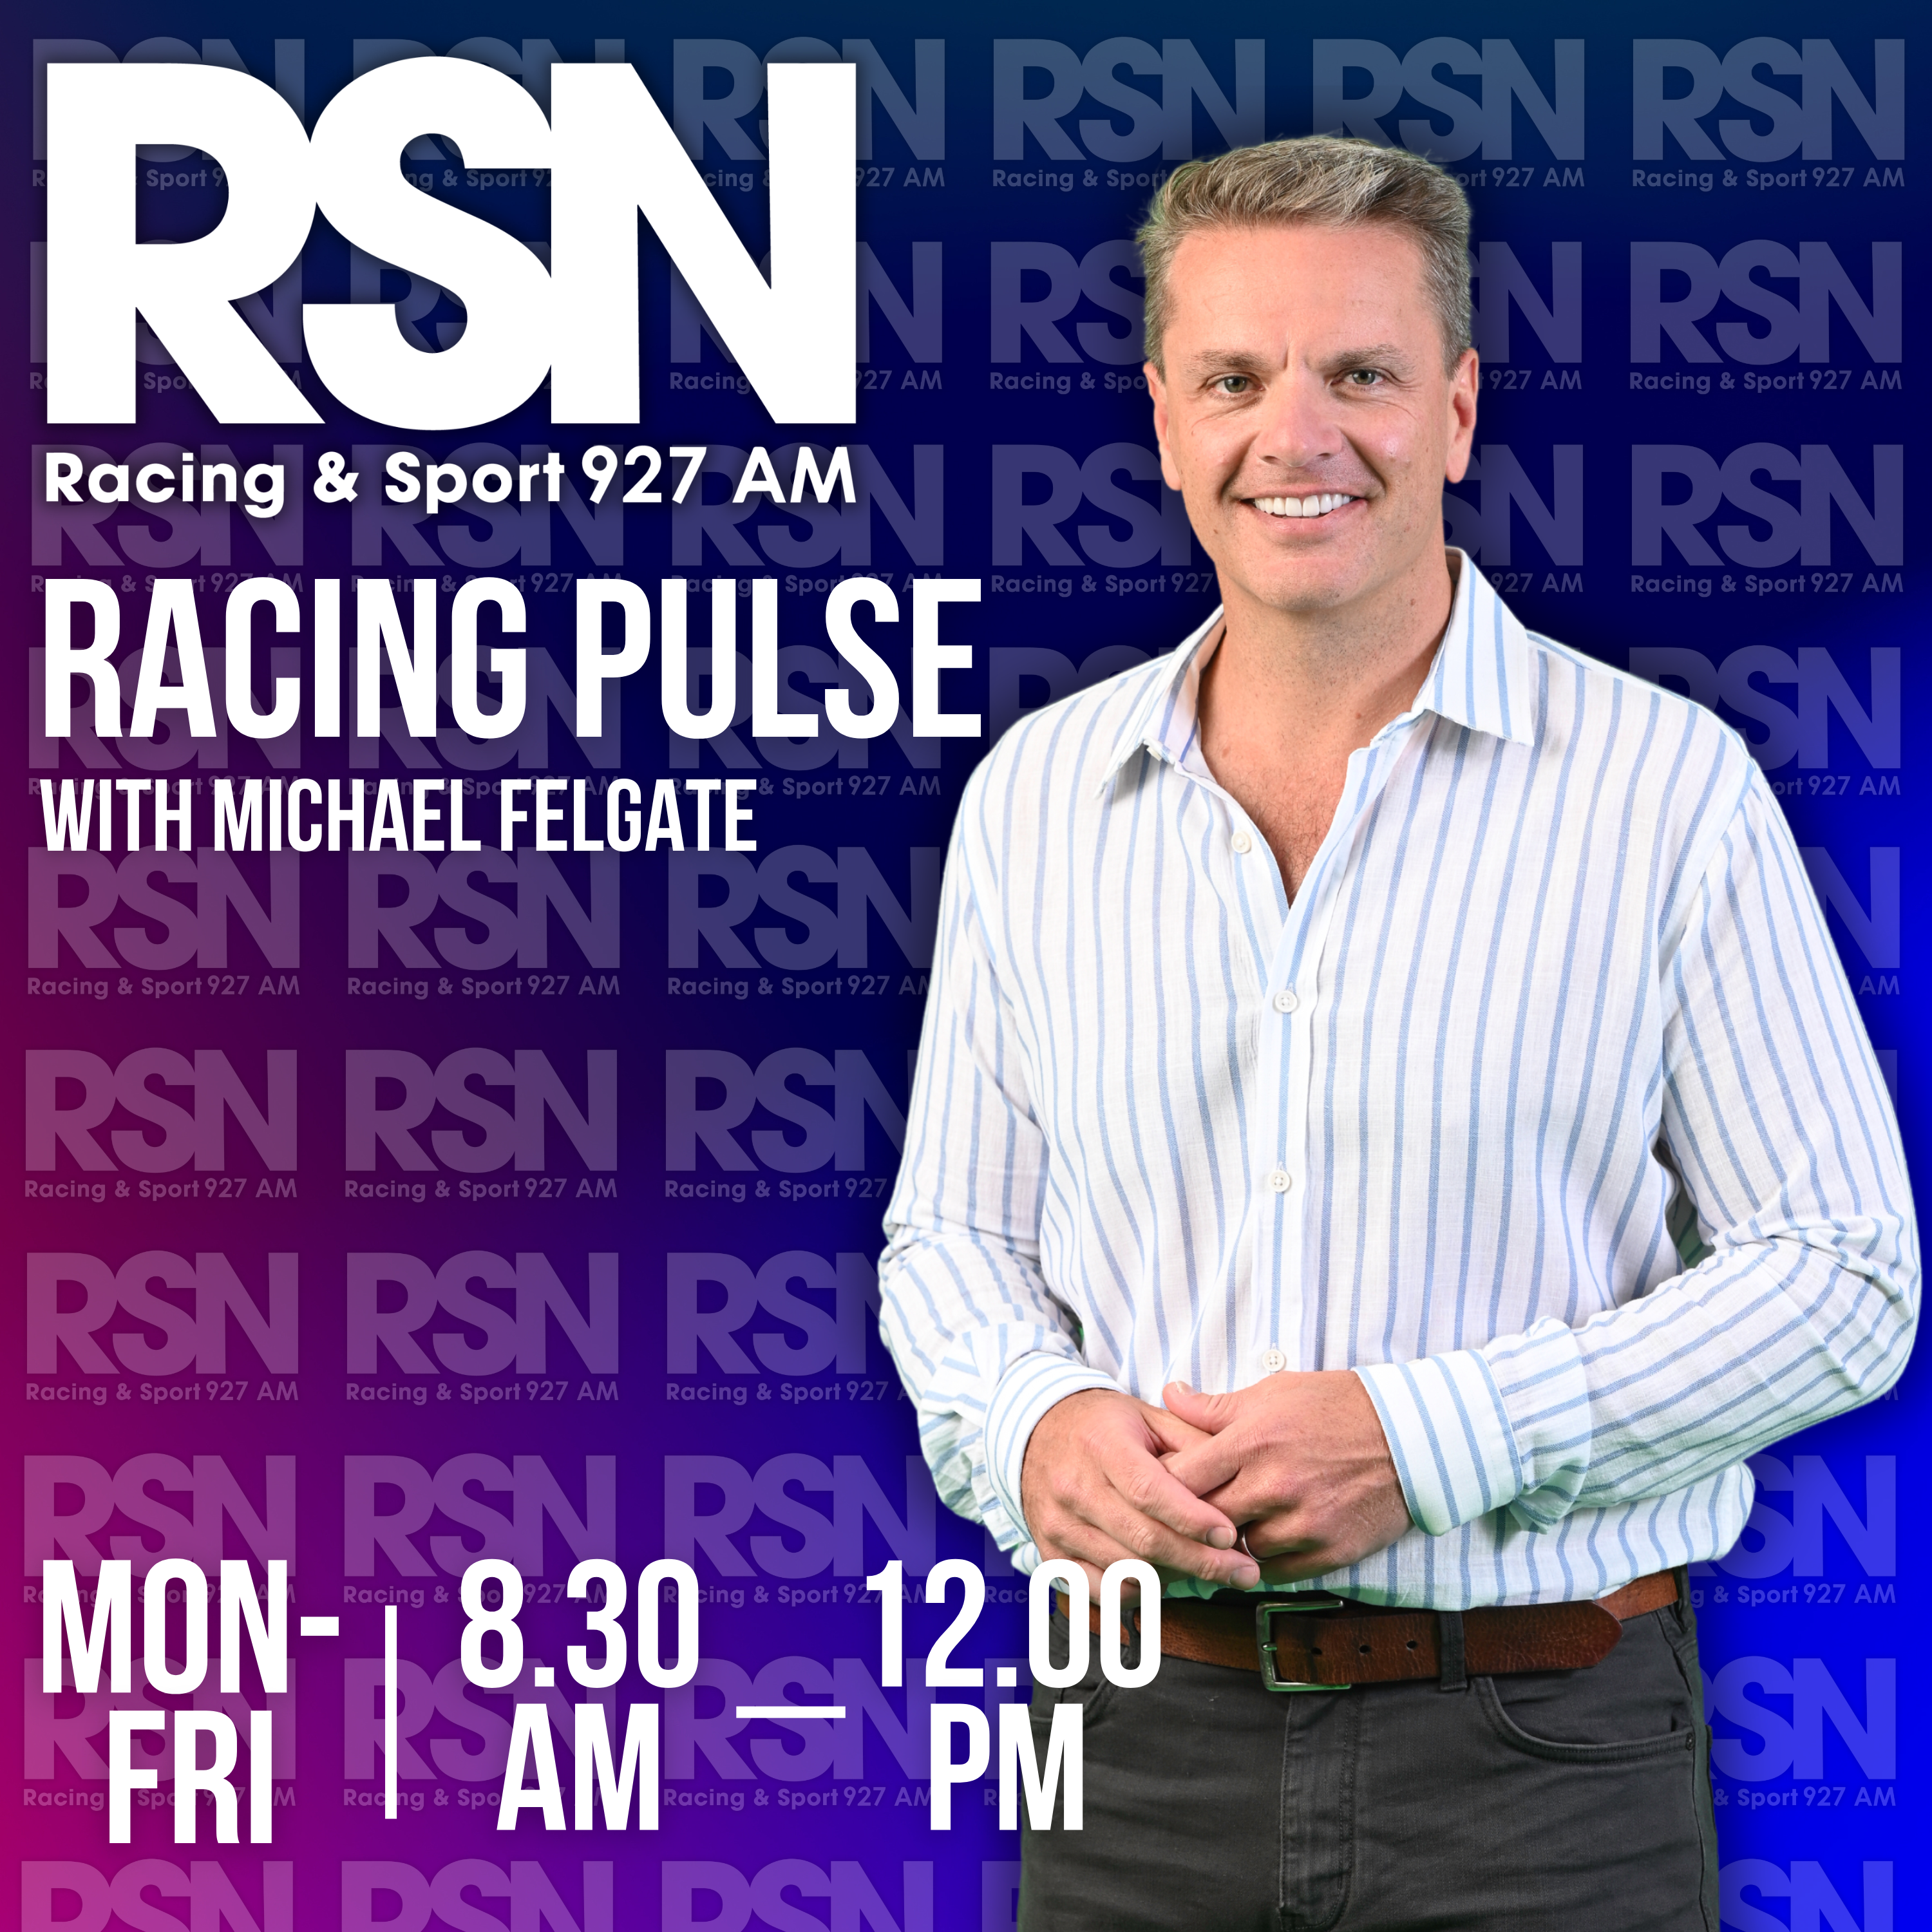 Ryan Phelan with the latest news in harness racing